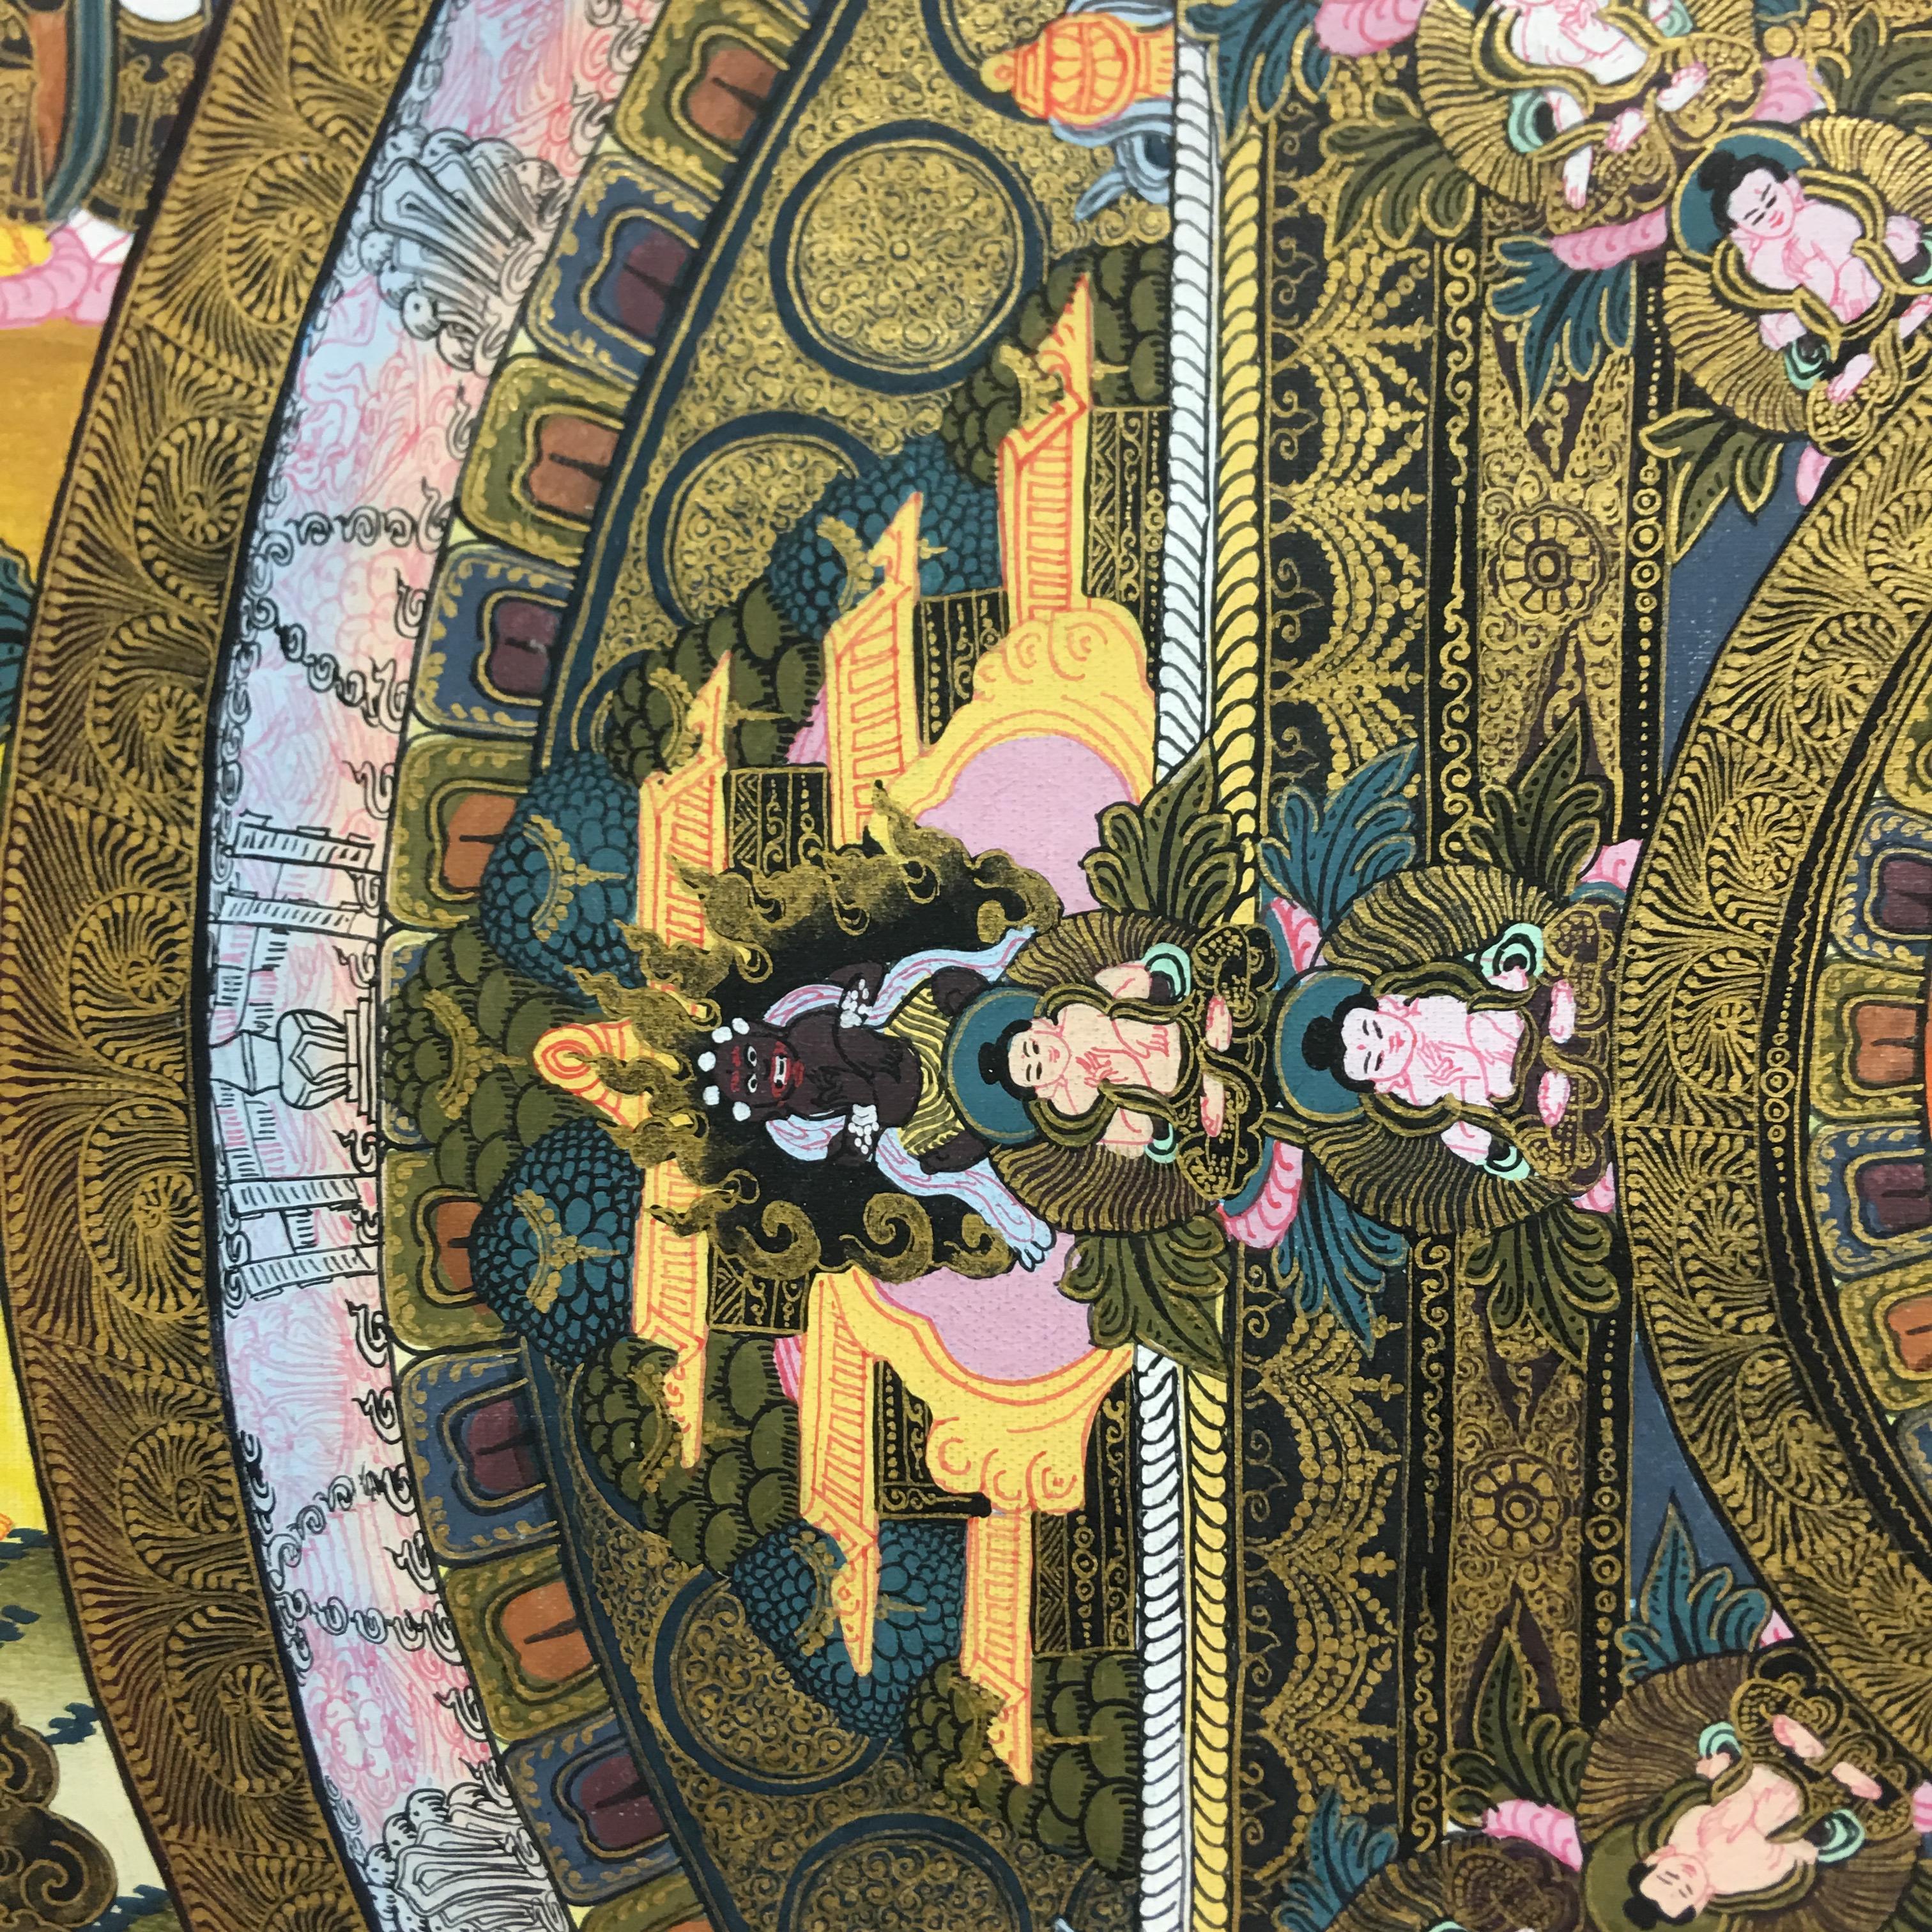 This thangka is hand painted on canvas with 24K gold. It has a center figure of Mayadevi, mother of Gautama Buddha, in the center. Buddha who is believed to have taken seven steps right after birth is depicted in the center along with Mayadevi under